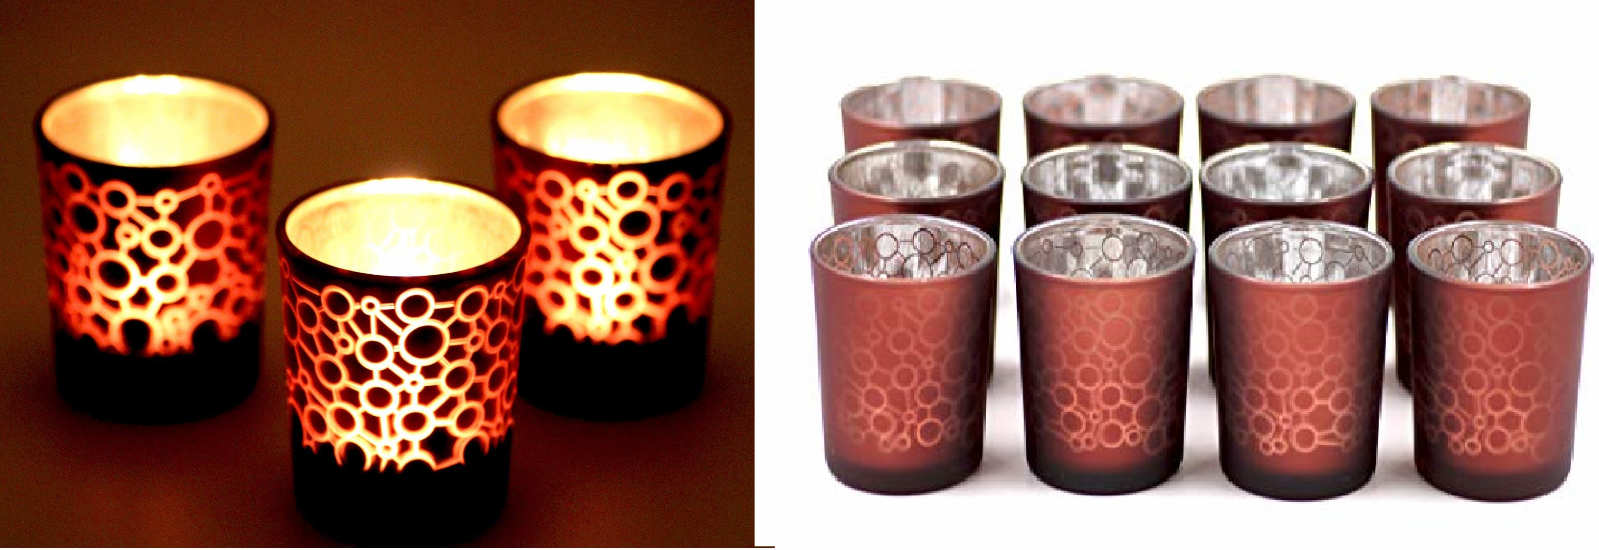 Glass Votive Candle Holders Spa Wedding Vinnet Beauty 2.6 IN. Set of 12 (Amber)